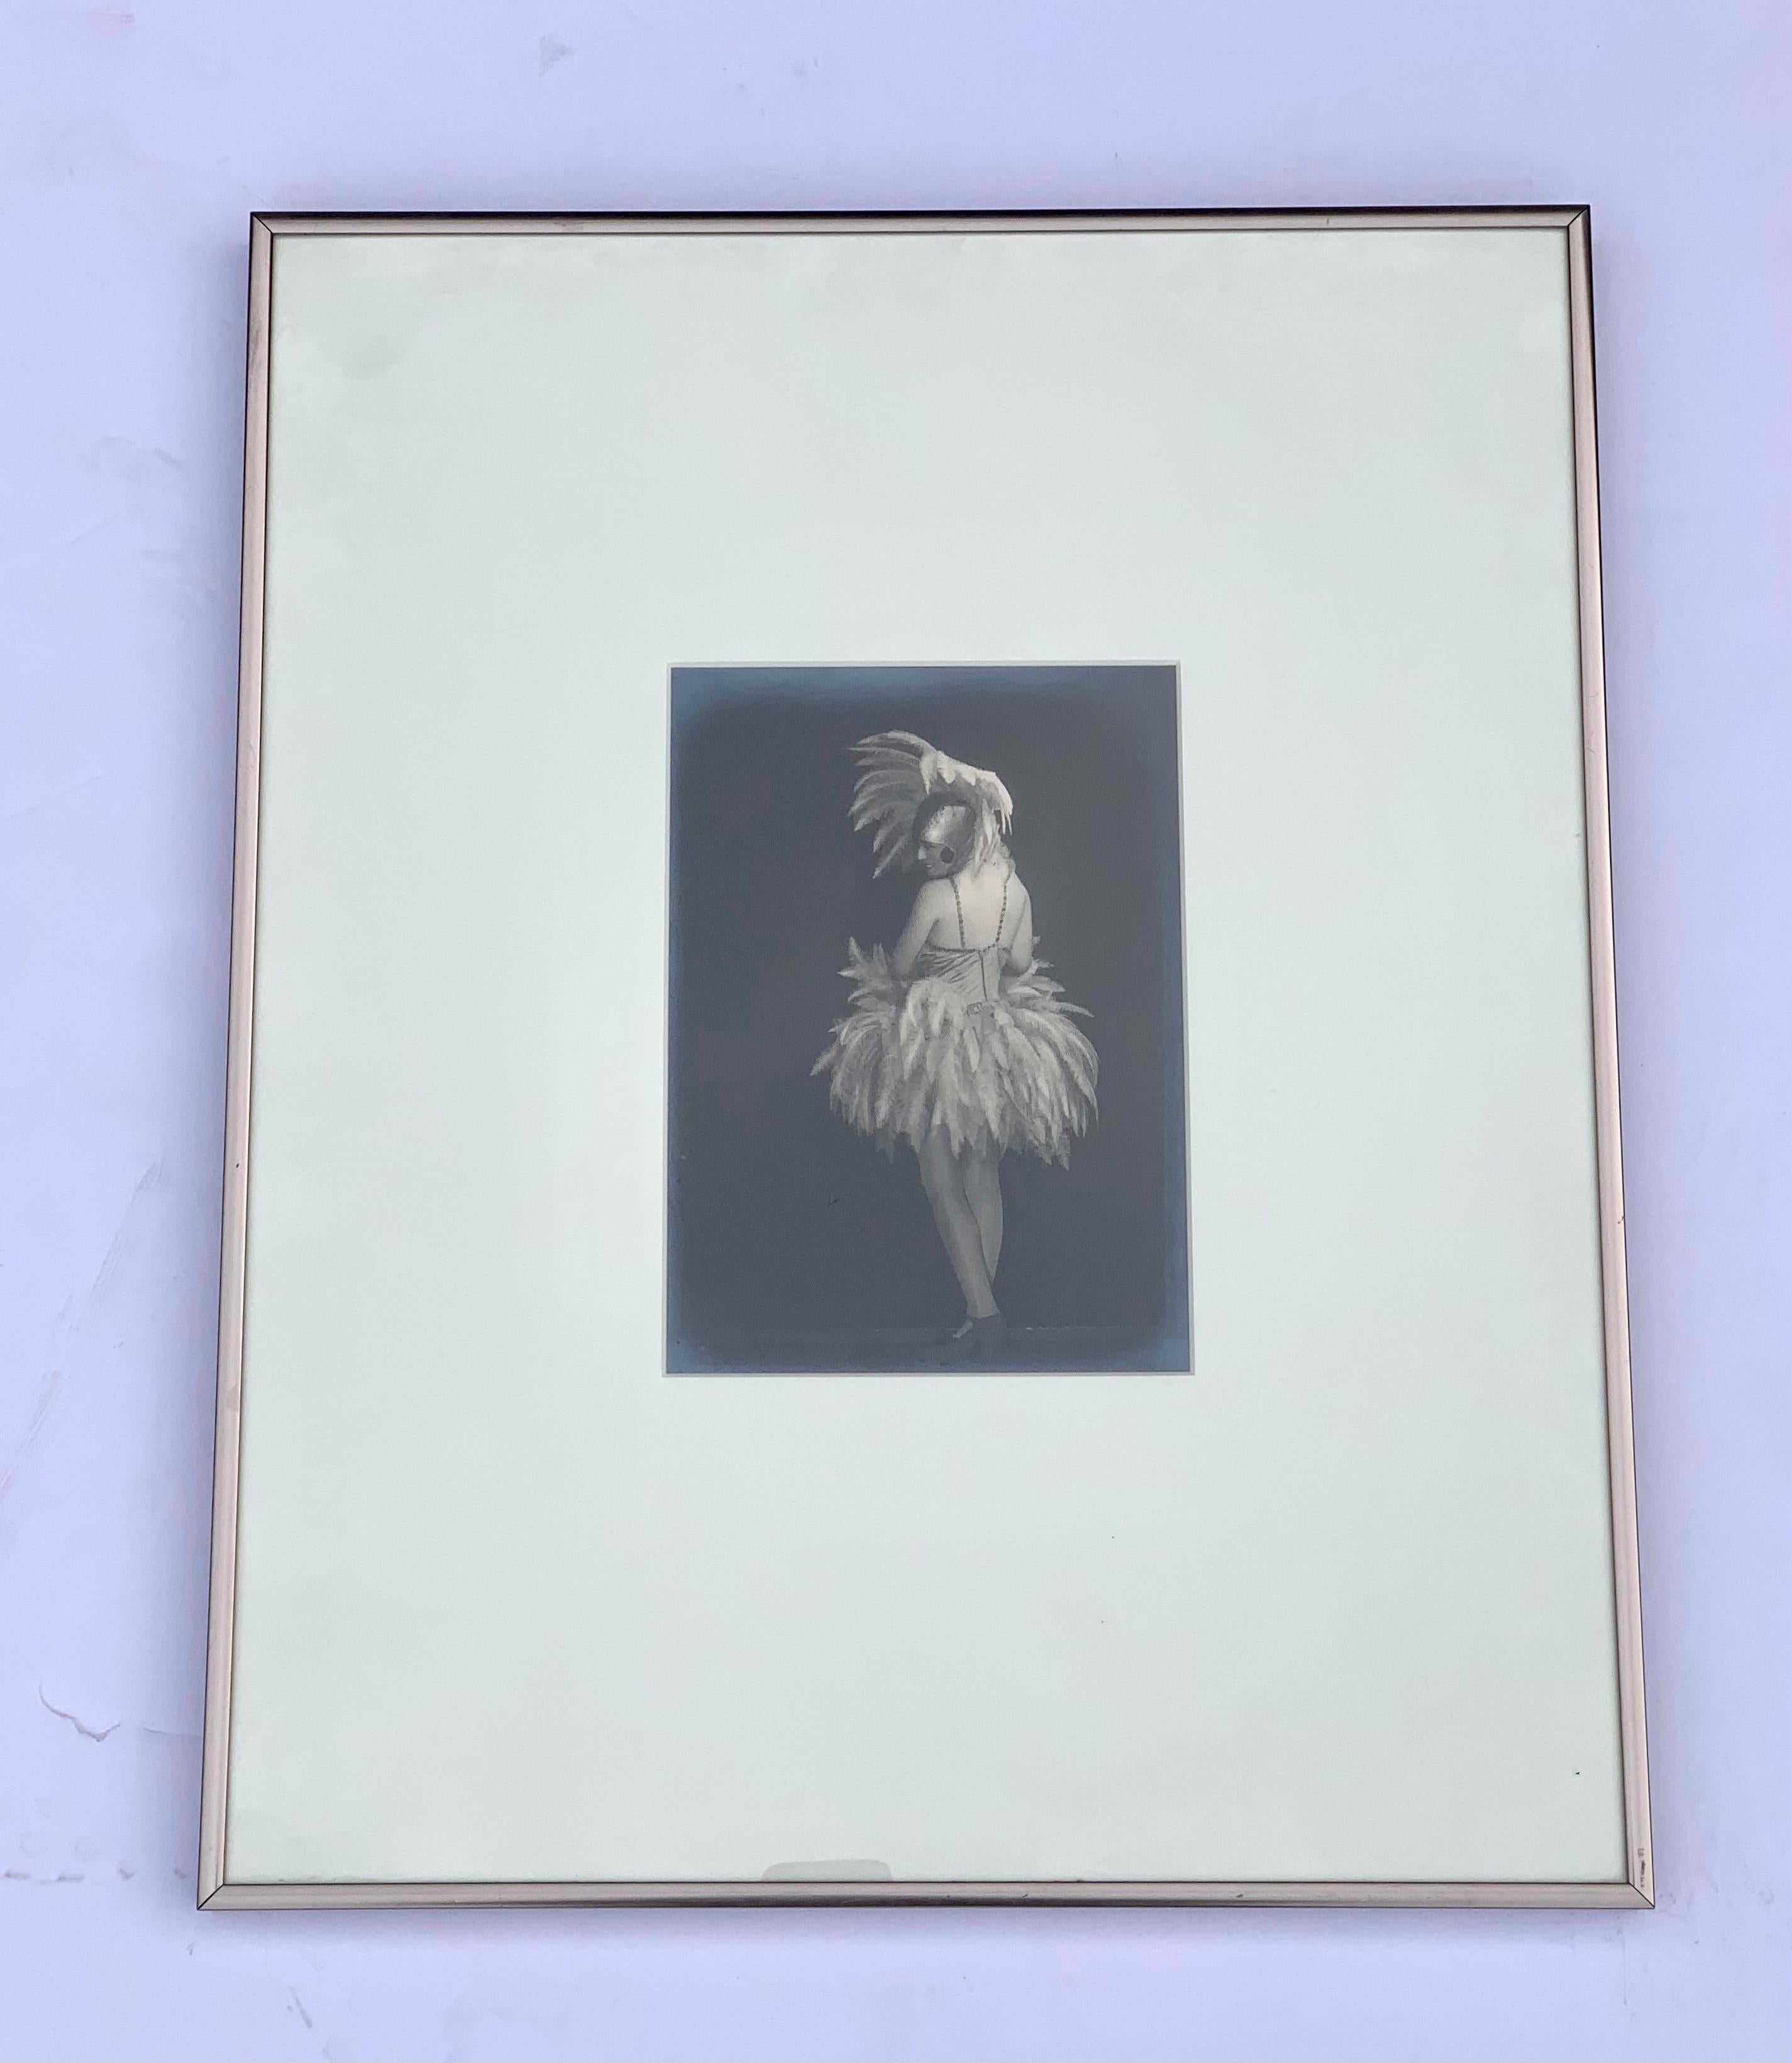 Rare antique photograph of Belgian actress on silver gelatin medium, framed. Mint condition and under glass. One of three rare photographs that we are selling on 1stDibs exclusively this week. Now more than ever, home is where the heart is.